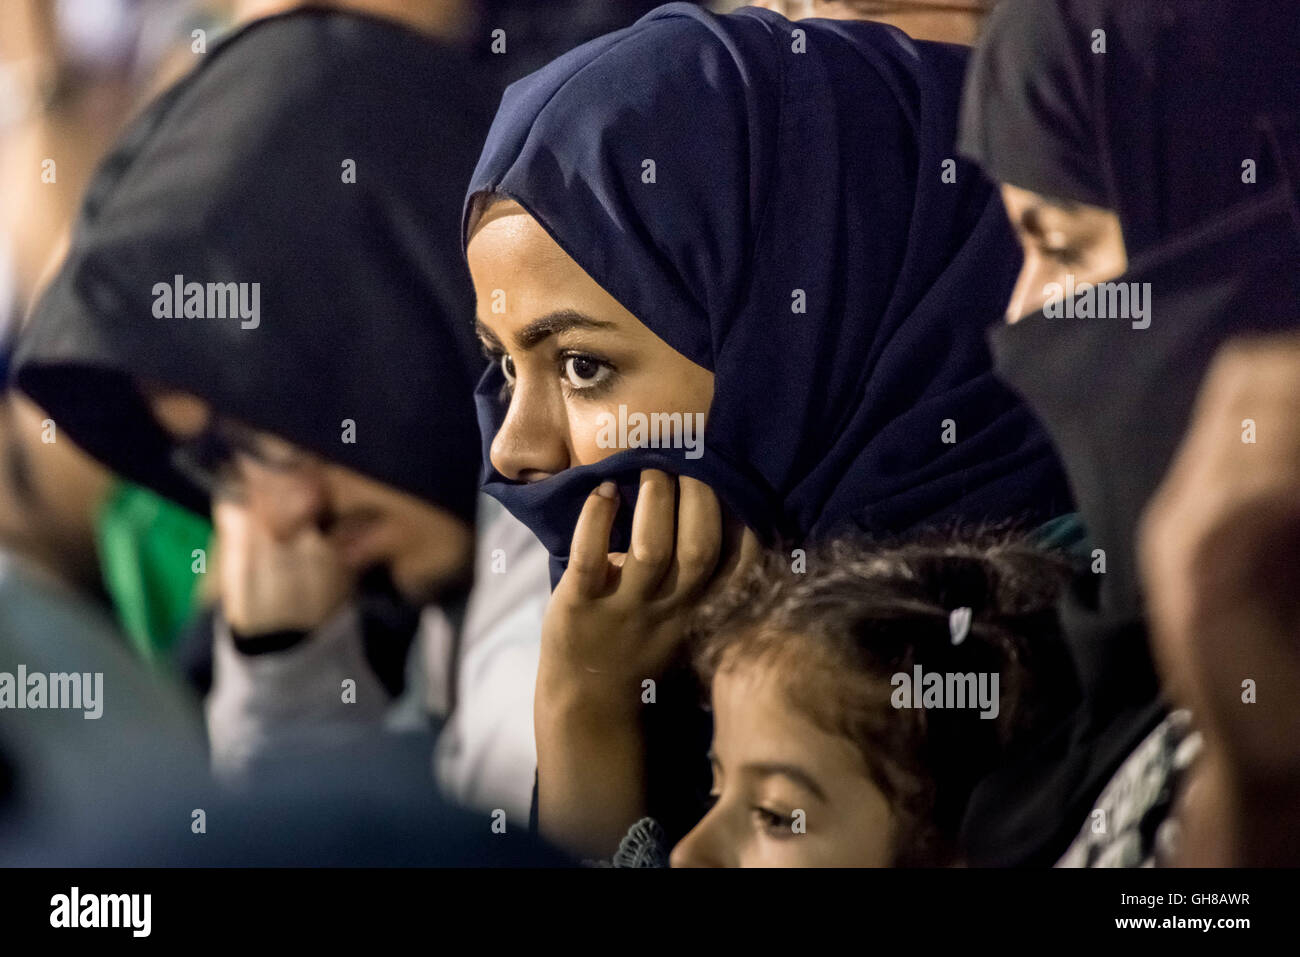 London, UK. 8th August, 2016. Saudis and other middle-eastern fans watch teams Al-Ahli vs Al-Hilal during the Saudi Super Cup match finals at Craven Cottage, Fulham Football Club Credit:  Guy Corbishley/Alamy Live News Stock Photo